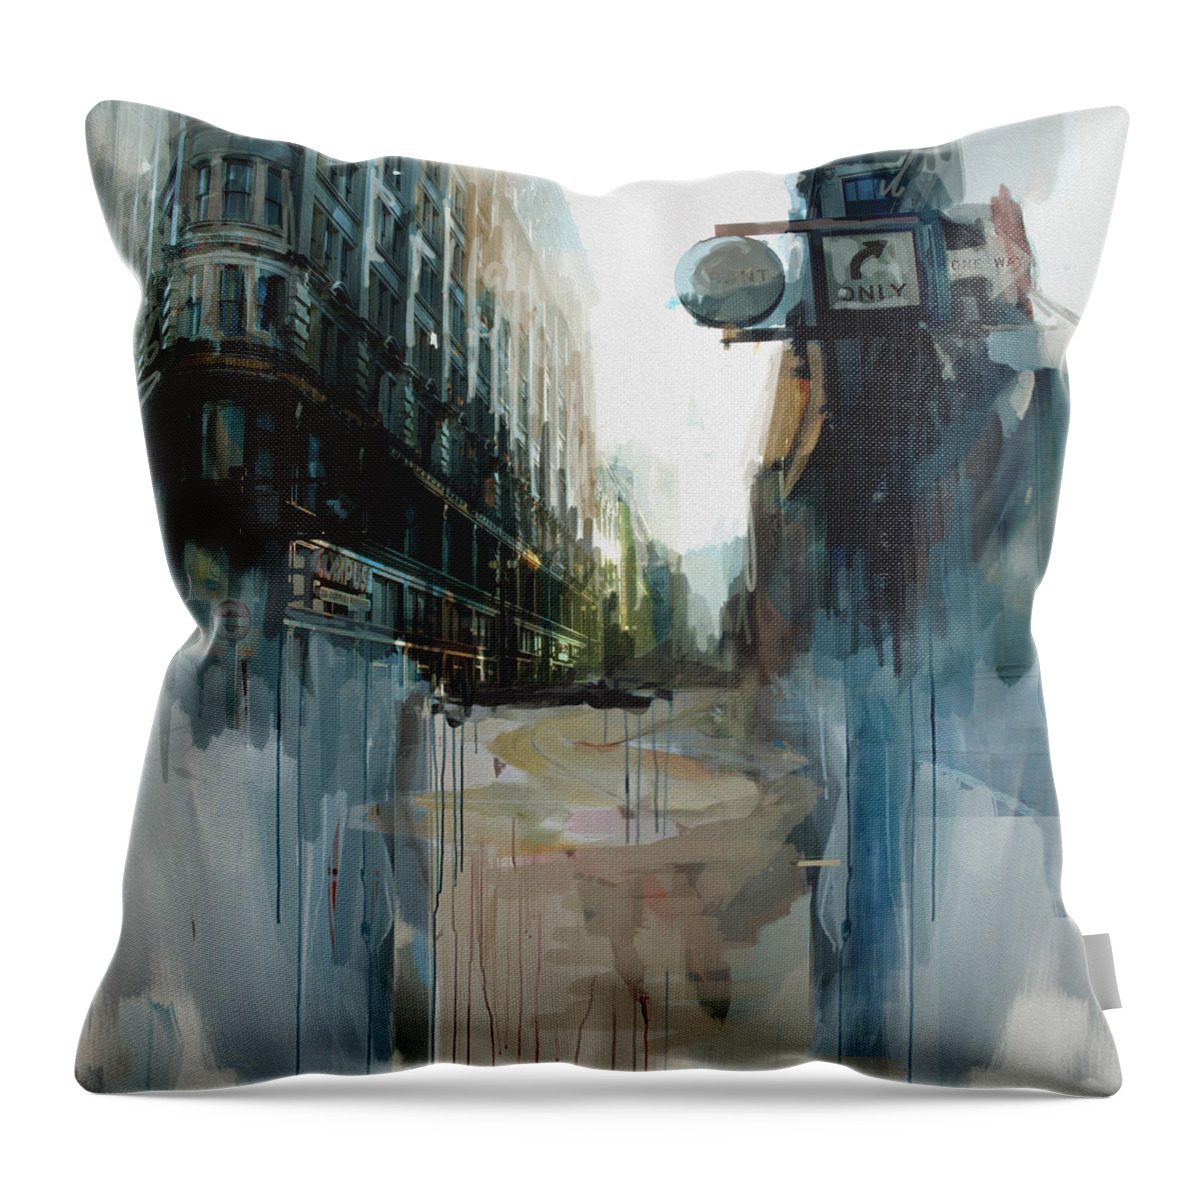 Grant Street Throw Pillow featuring the painting 077 Grant street by Maryam Mughal